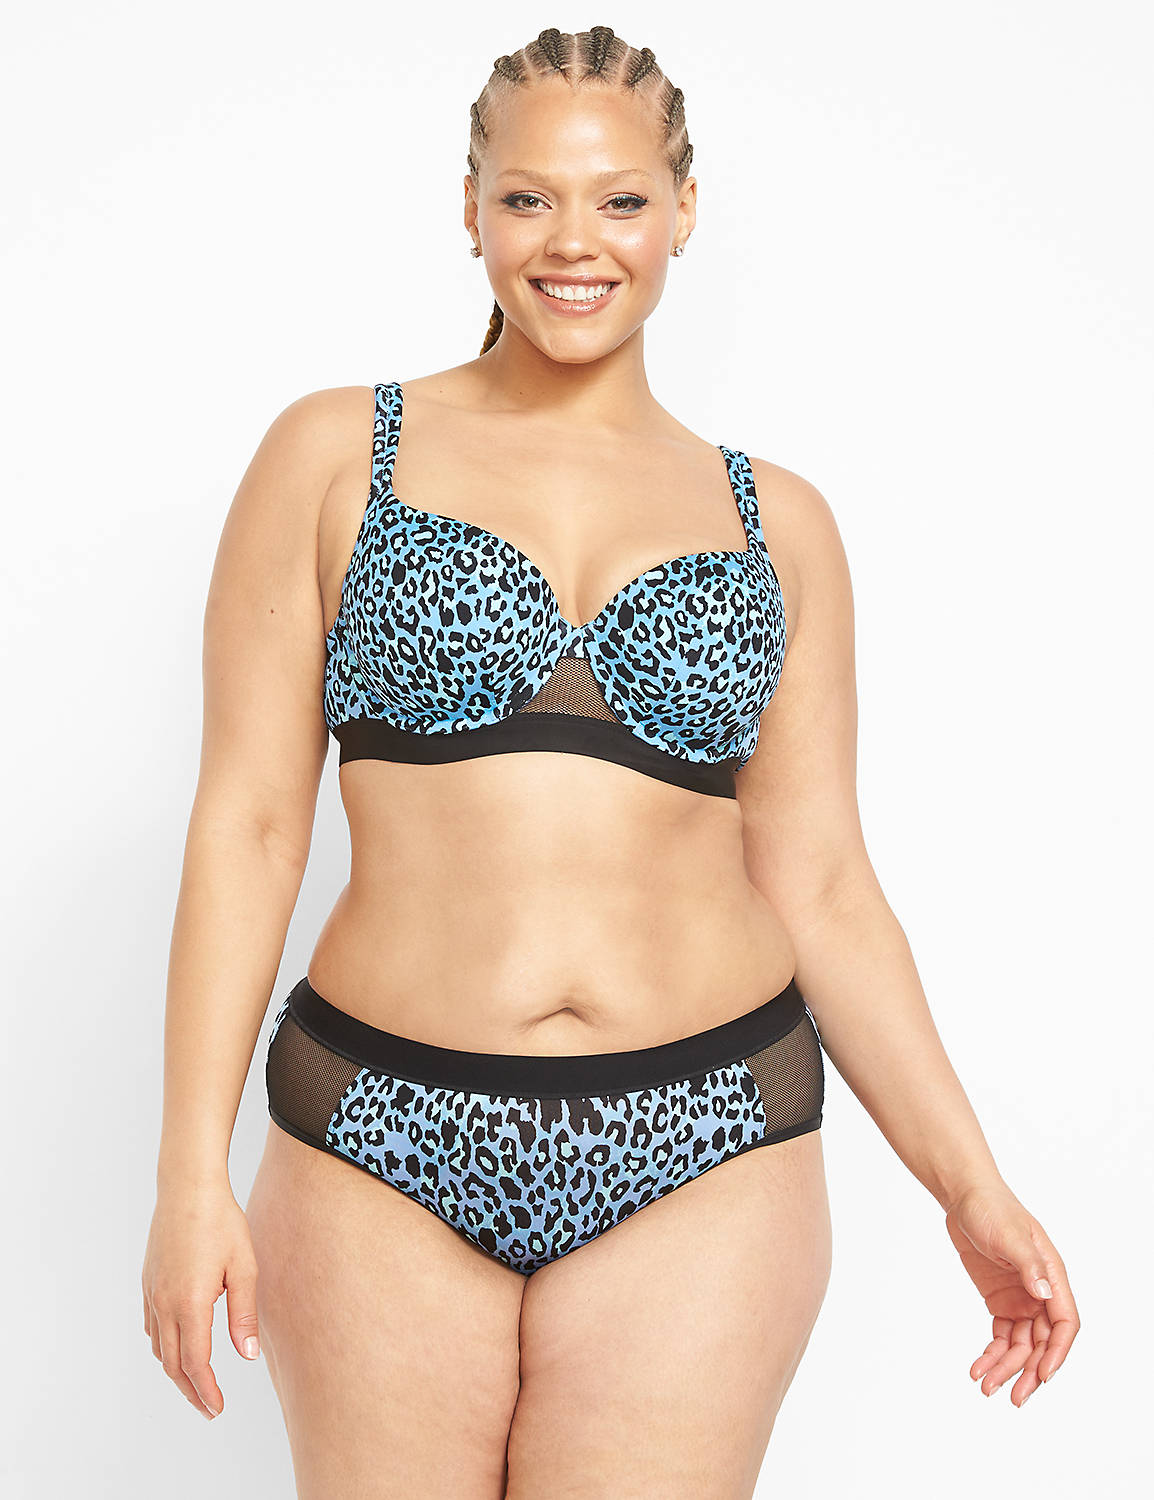 Details about   Cacique Lane Bryant $52 The Modern Collection Boost Balconette Lace Bra 32C